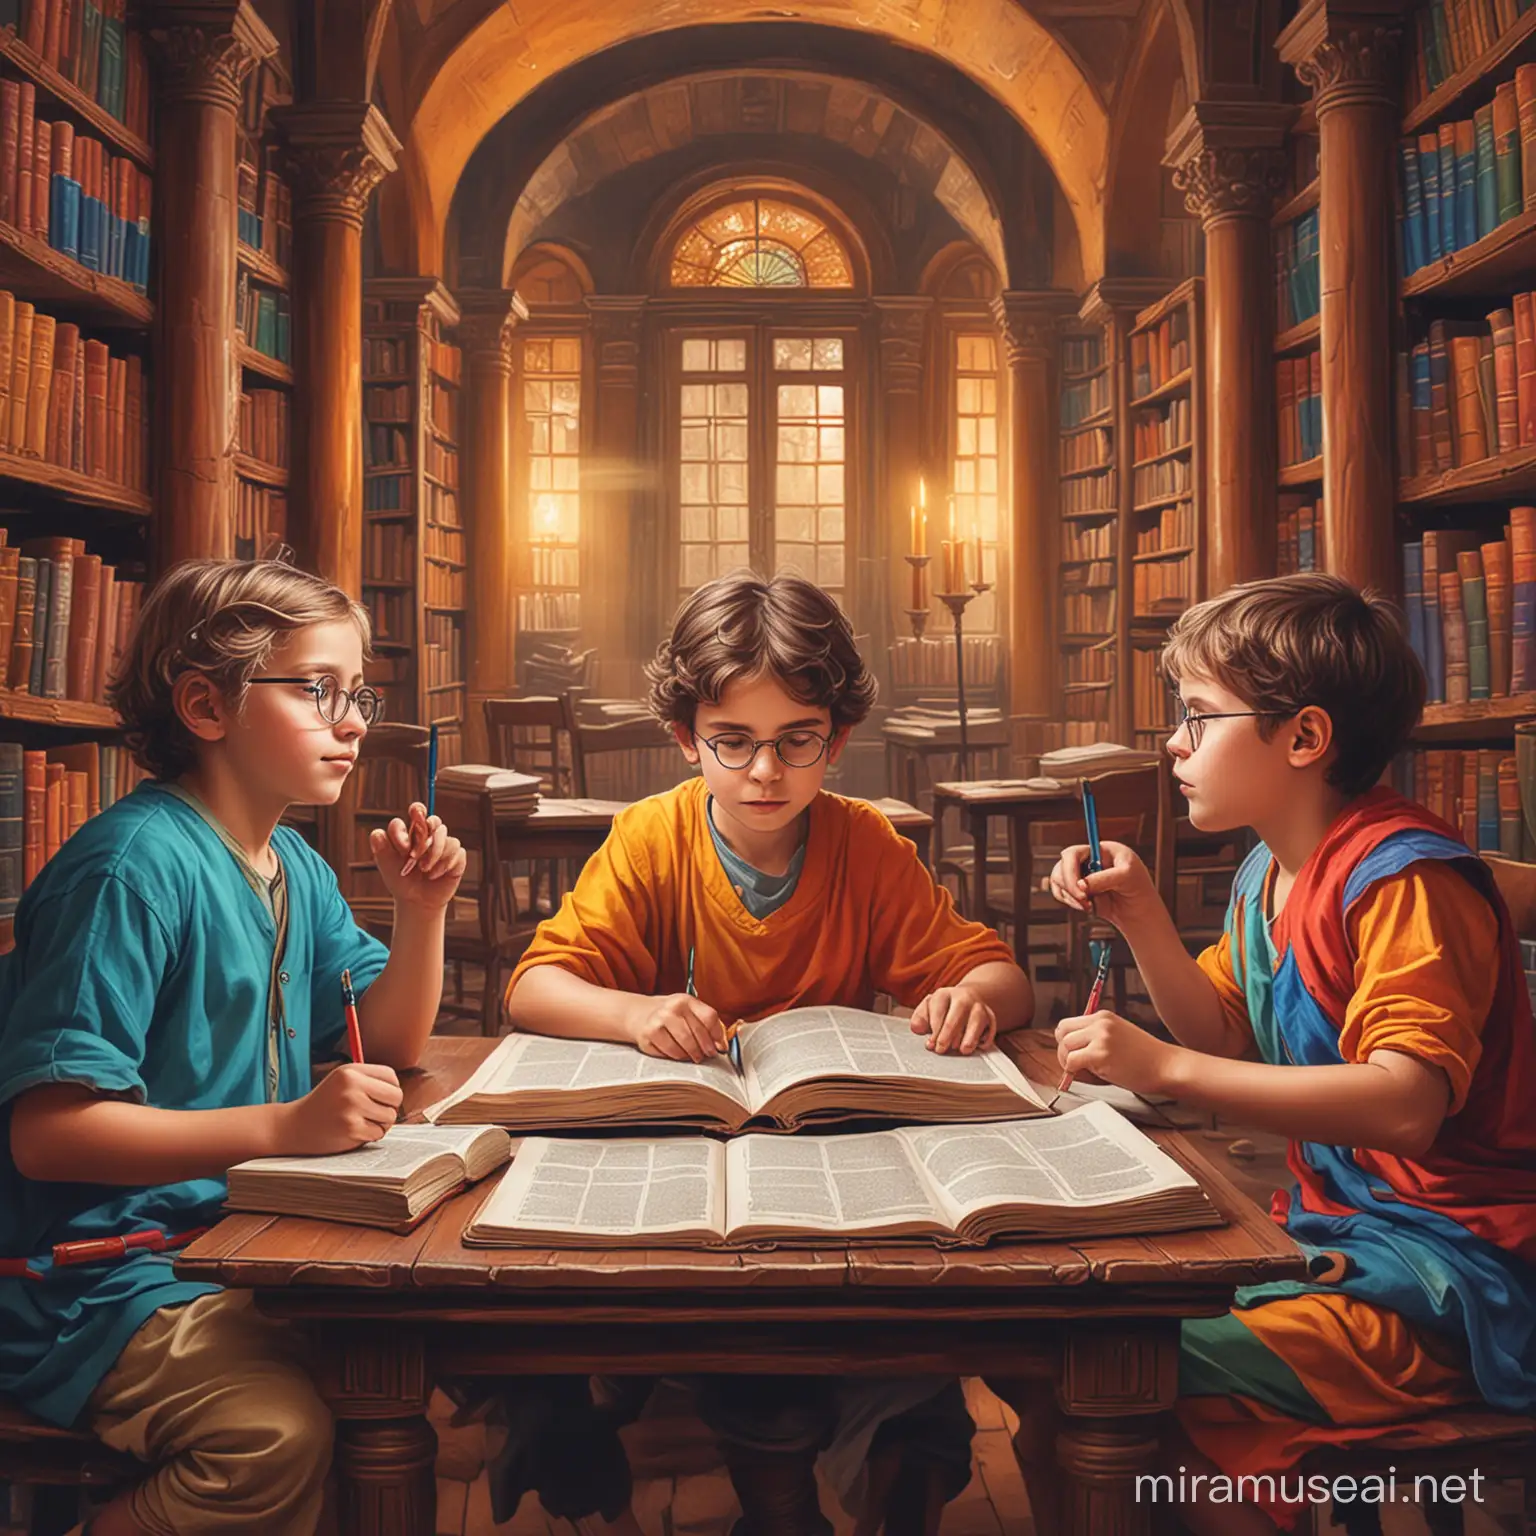 Philosopher Children in Colorful Ancient Library